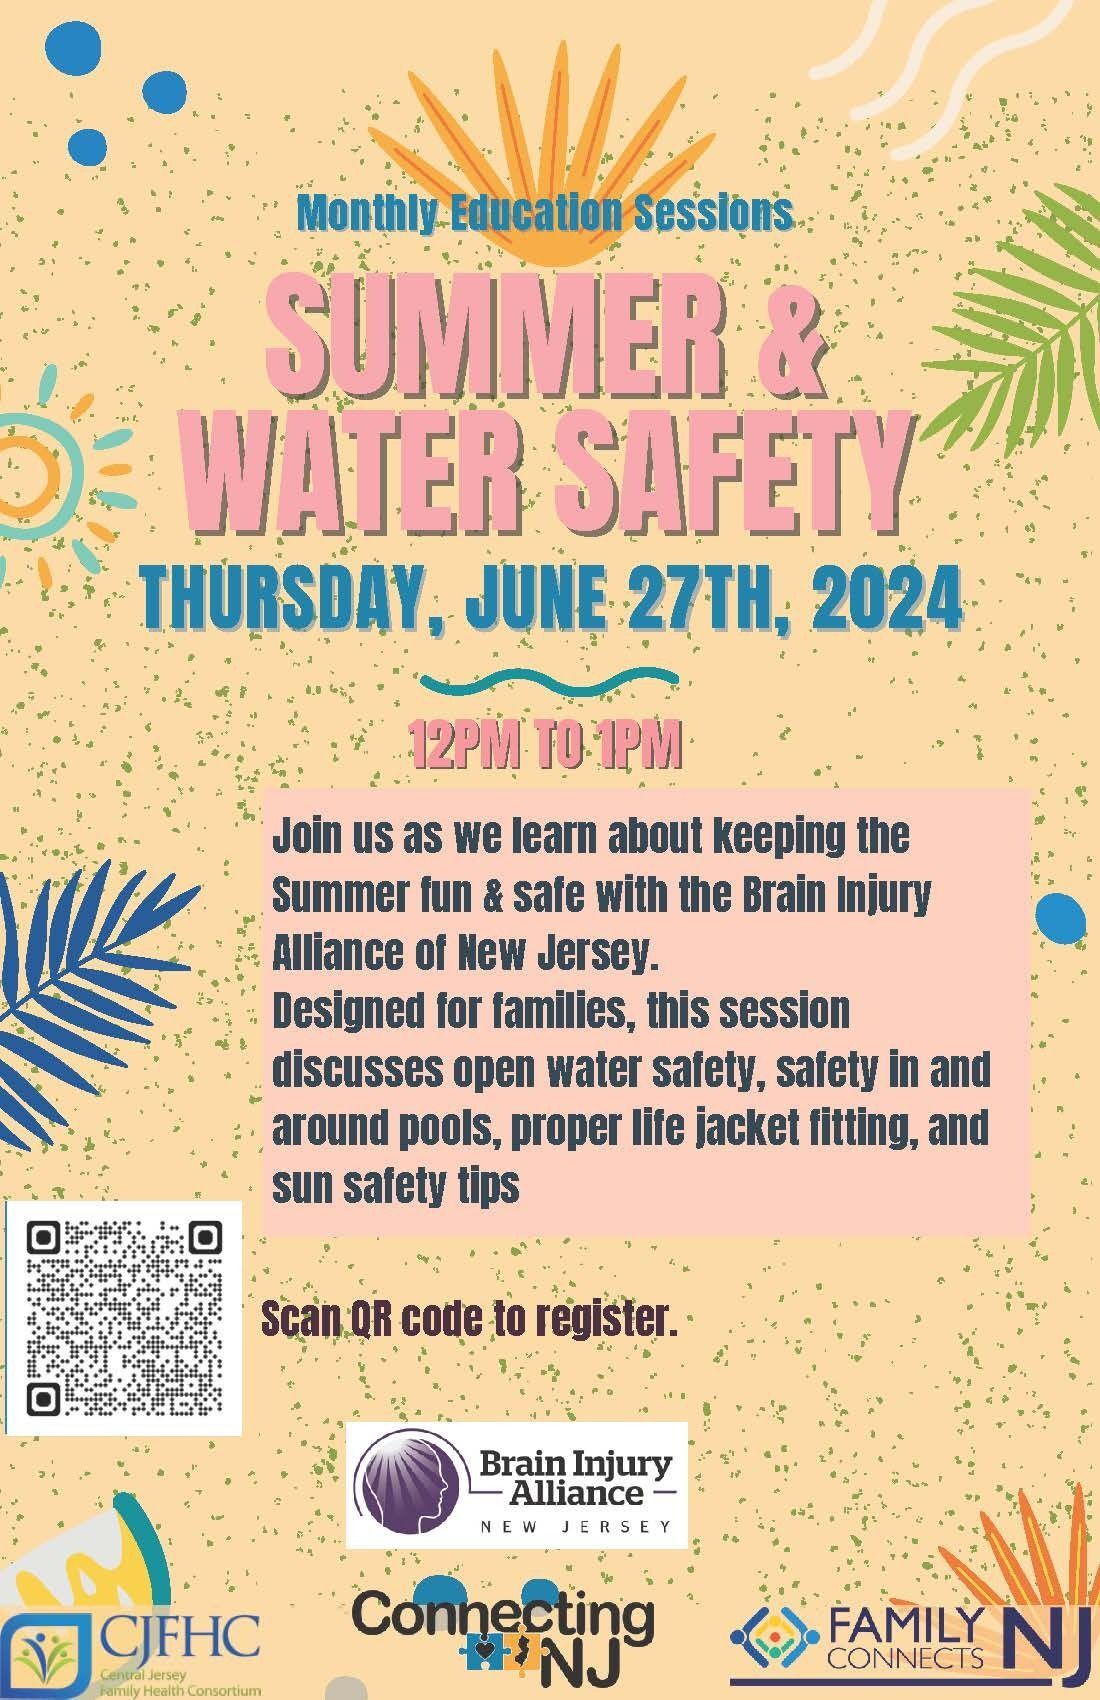 Summer & Water Safety Education Session June 27, 2024